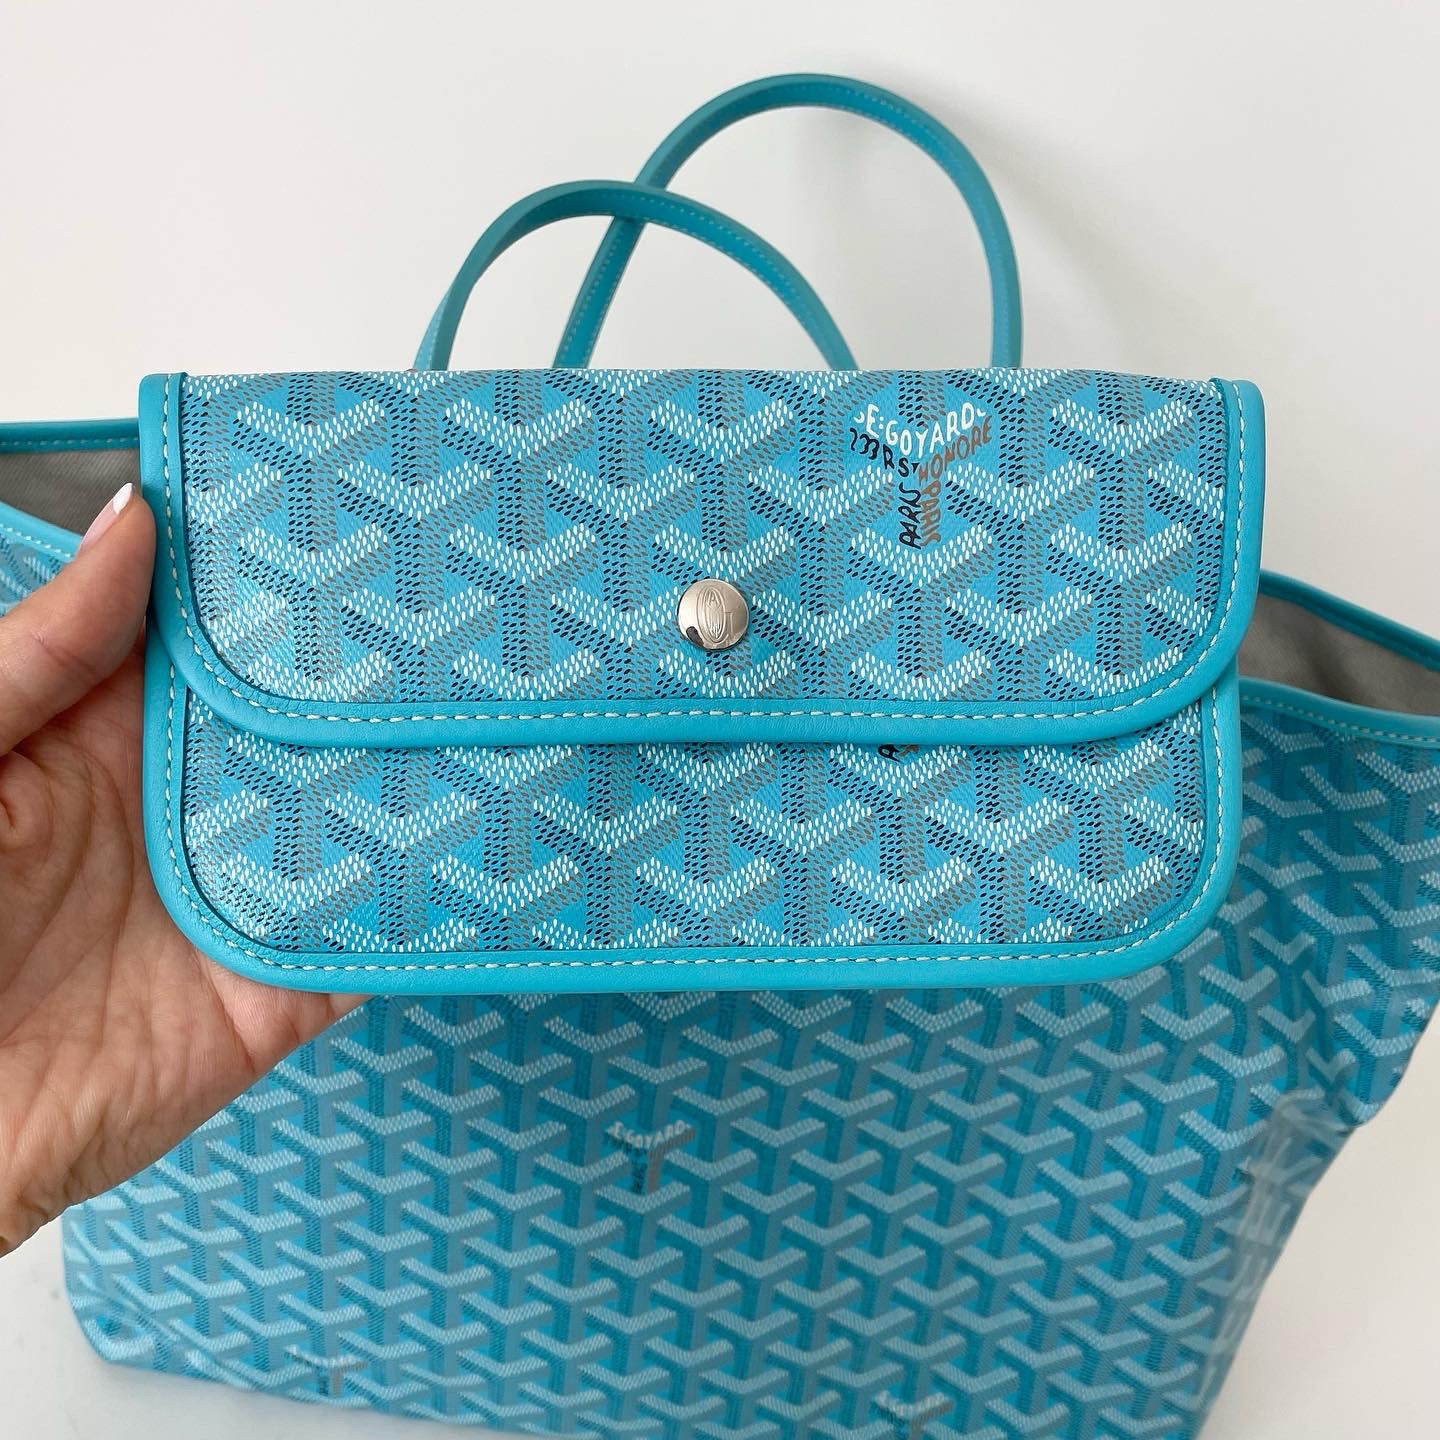 NWOT Limited Edition Goyard Turquoise Blue Special Color St. Louis